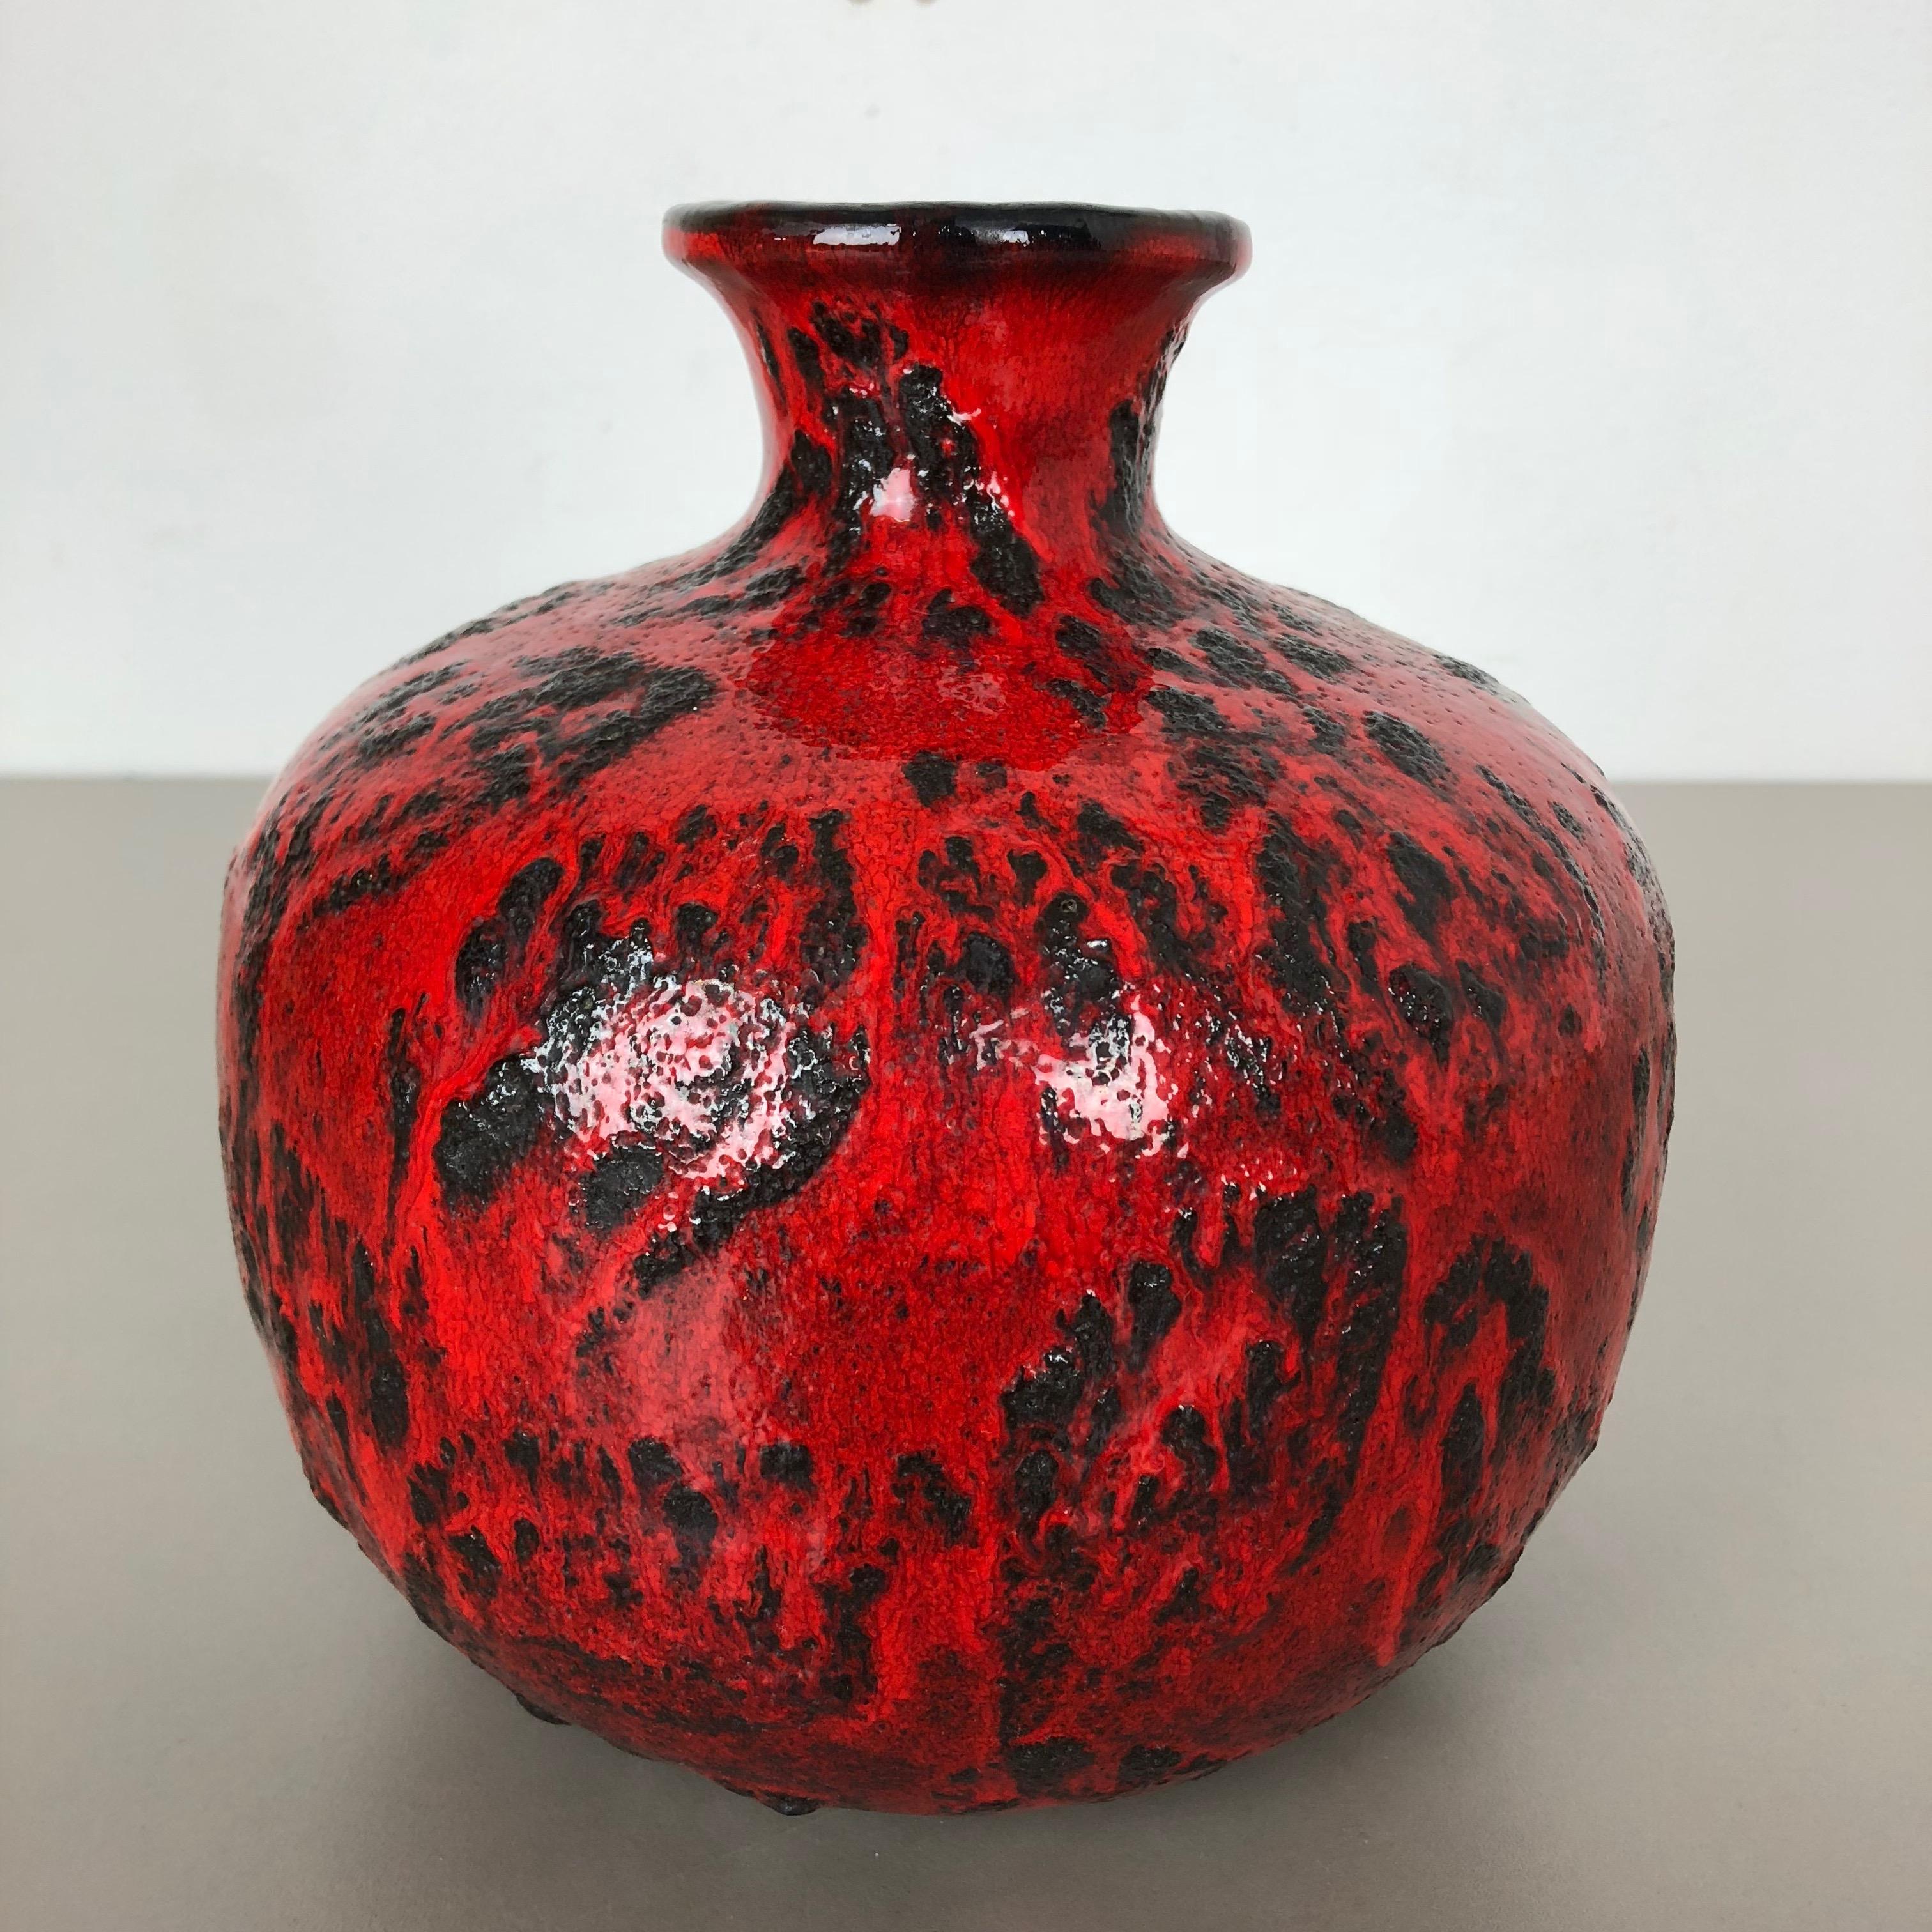 Super Colorful Fat Lava Pottery Vase by Gräflich Ortenburg, Germany, 1960s For Sale 2